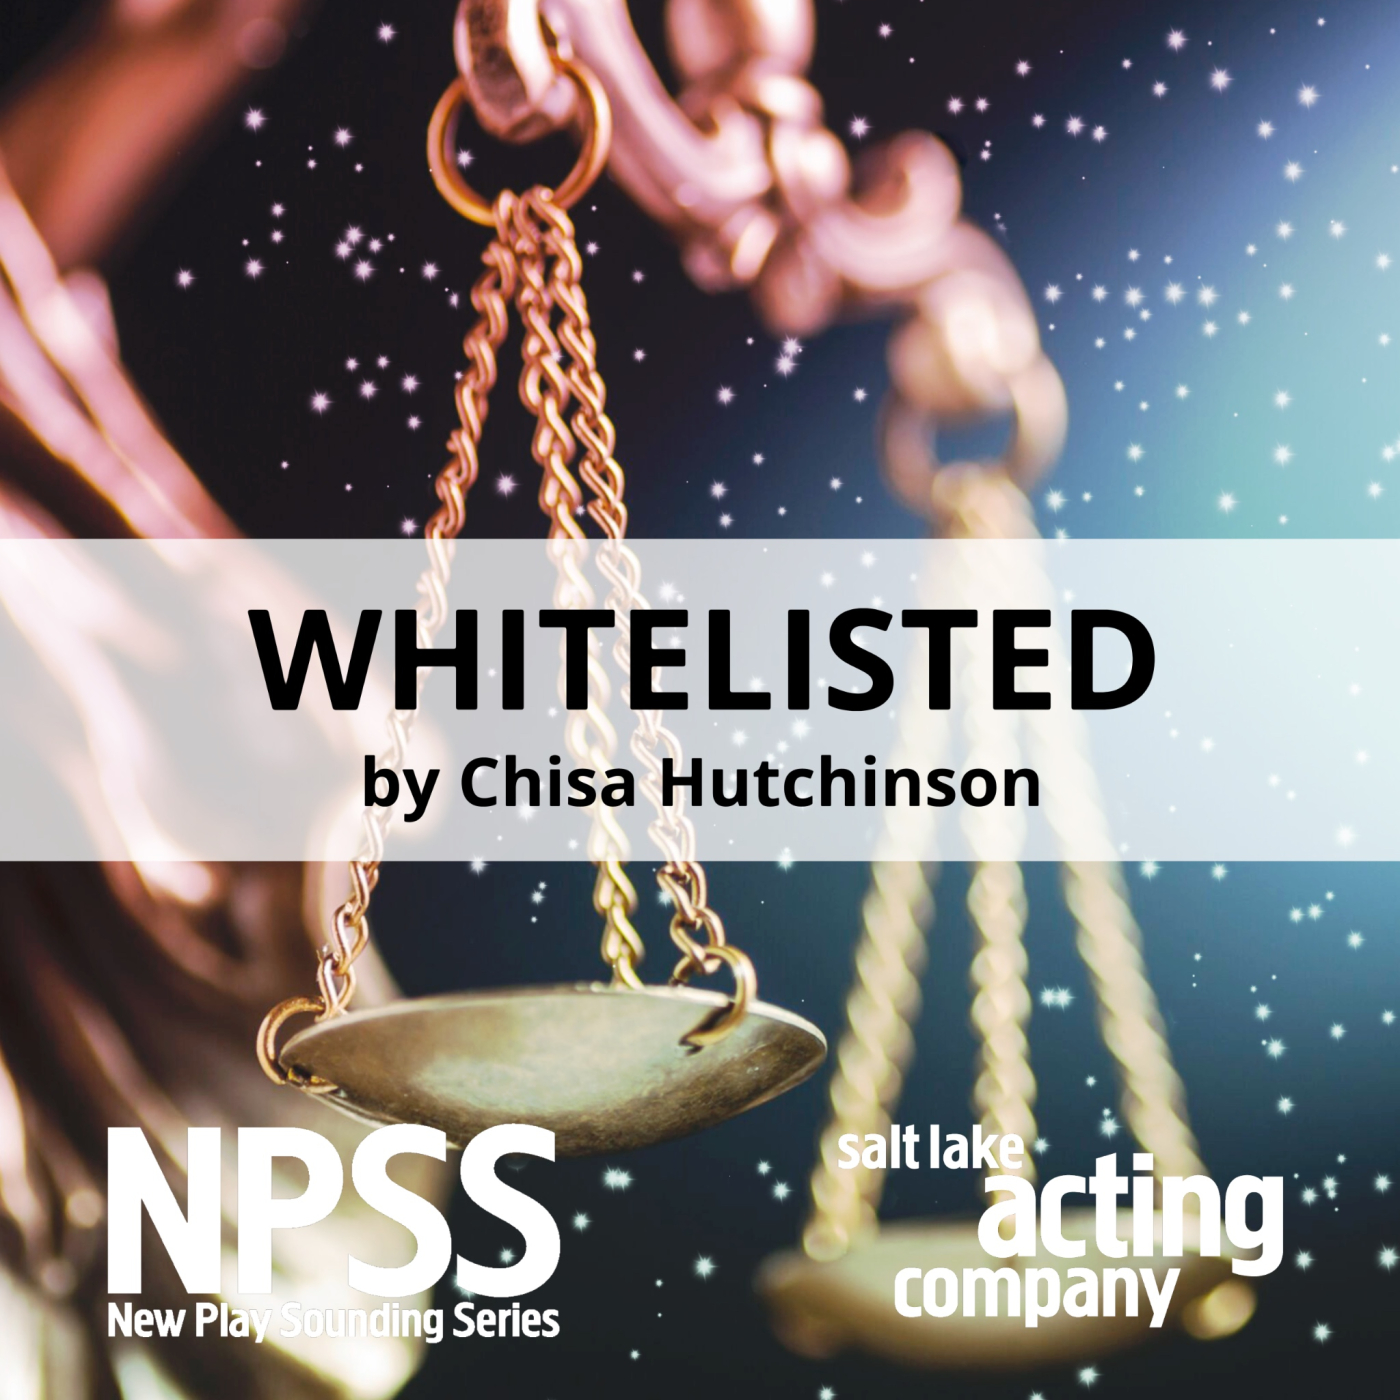 WHITELISTED by Chisa Hutchinson